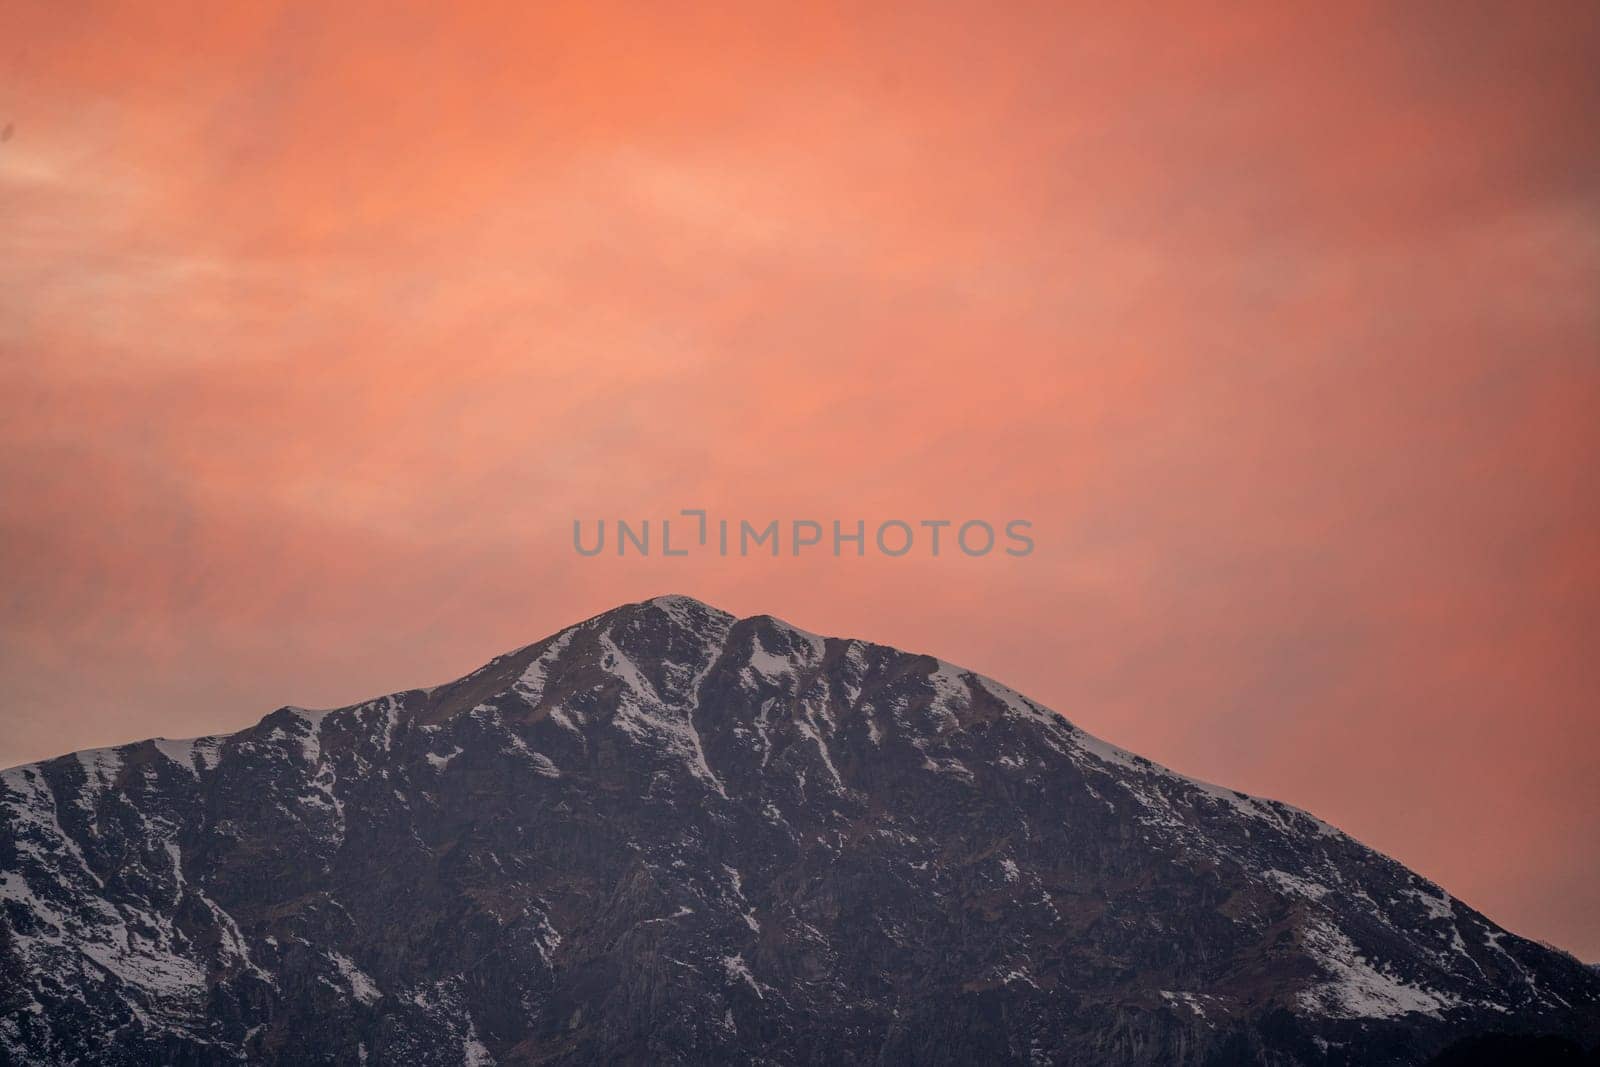 red orange dusk dawn colors over snow covered himalaya mountains and fluffy clouds showing hill stations in jhibbi kullu manali by Shalinimathur